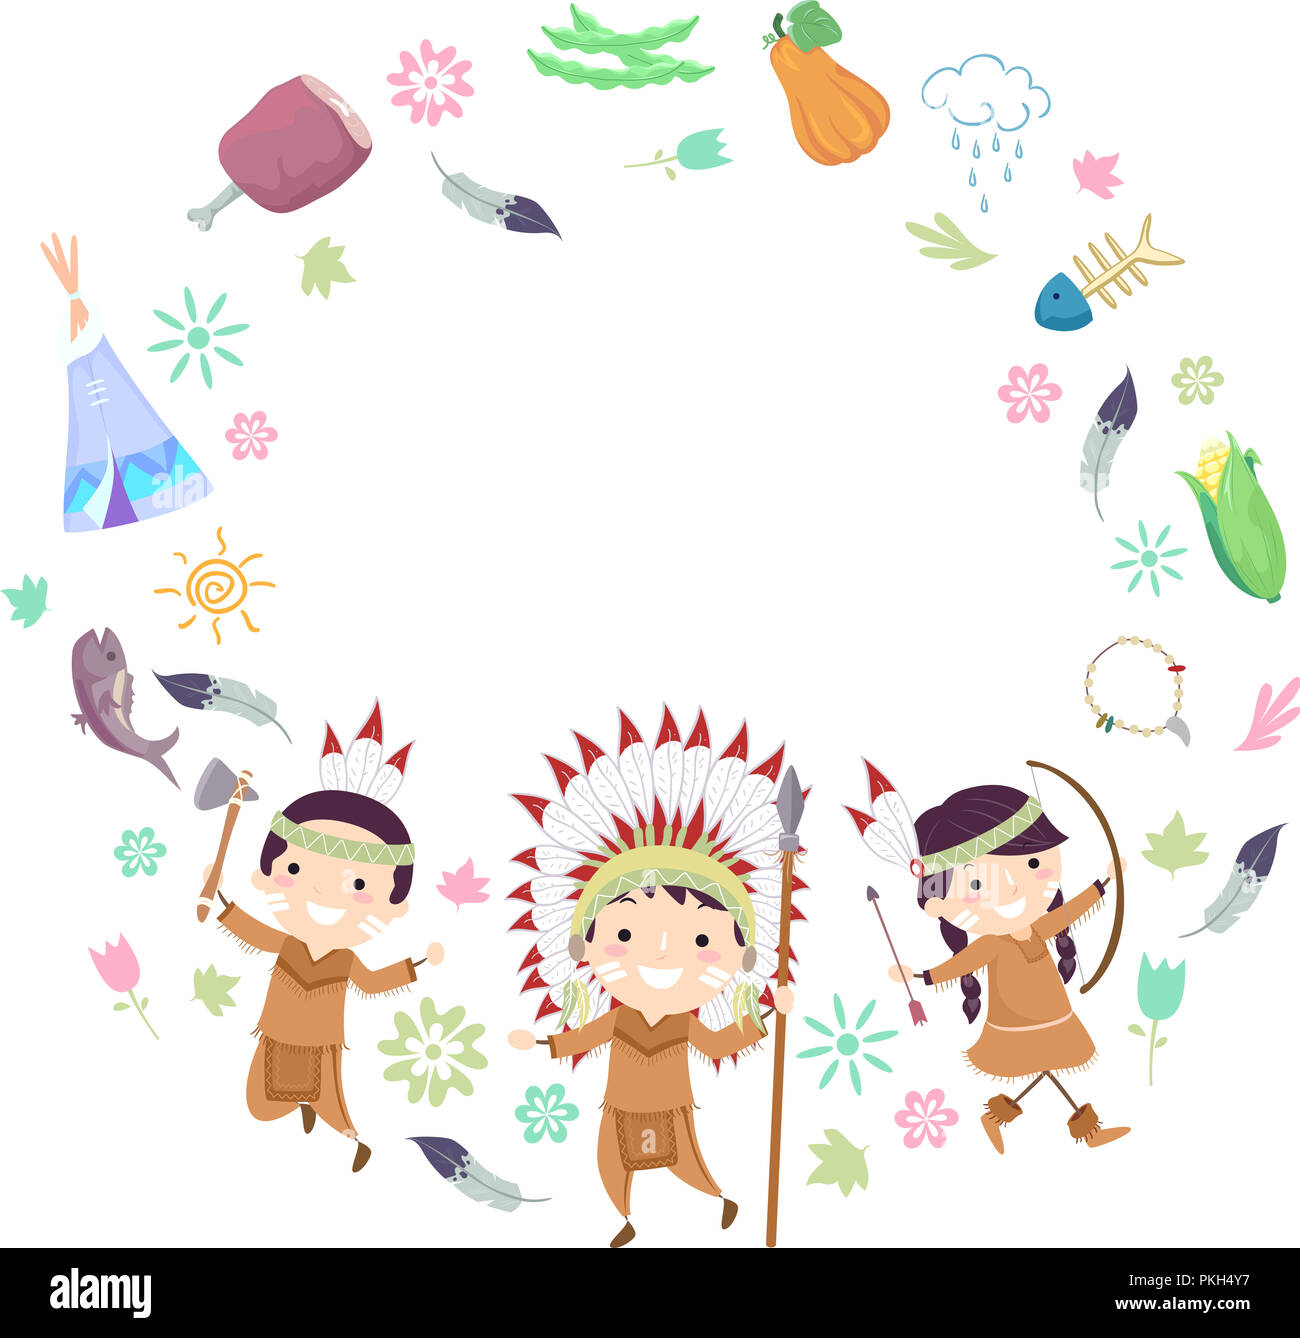 Illustration of Stickman Native American Kids with Spear and Bow and Arrow with Different Tribal Elements Frame Stock Photo